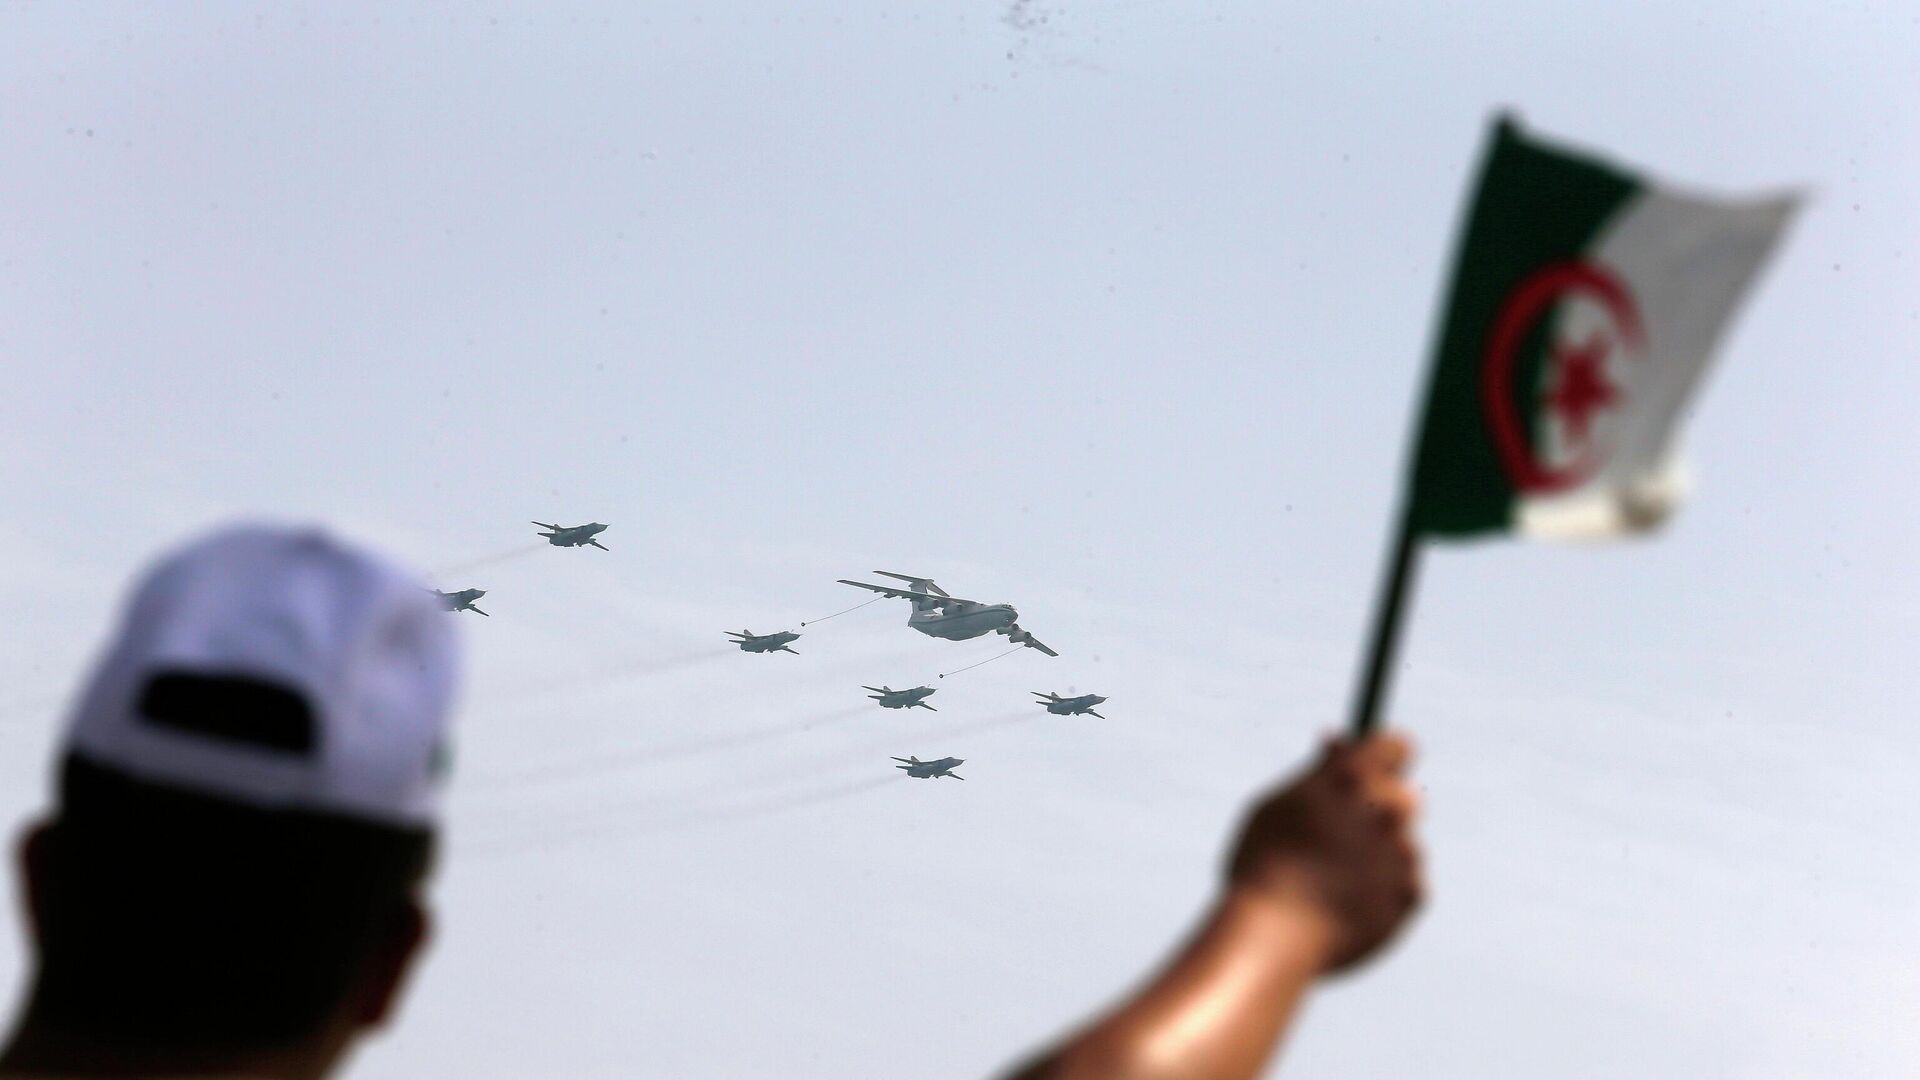 A man waves an Algerian flag as war planes fly during a military parade to mark the 60th anniversary of Algeria's independence, Tuesday, July 5, 2022 in Algiers.  - Sputnik International, 1920, 23.12.2022